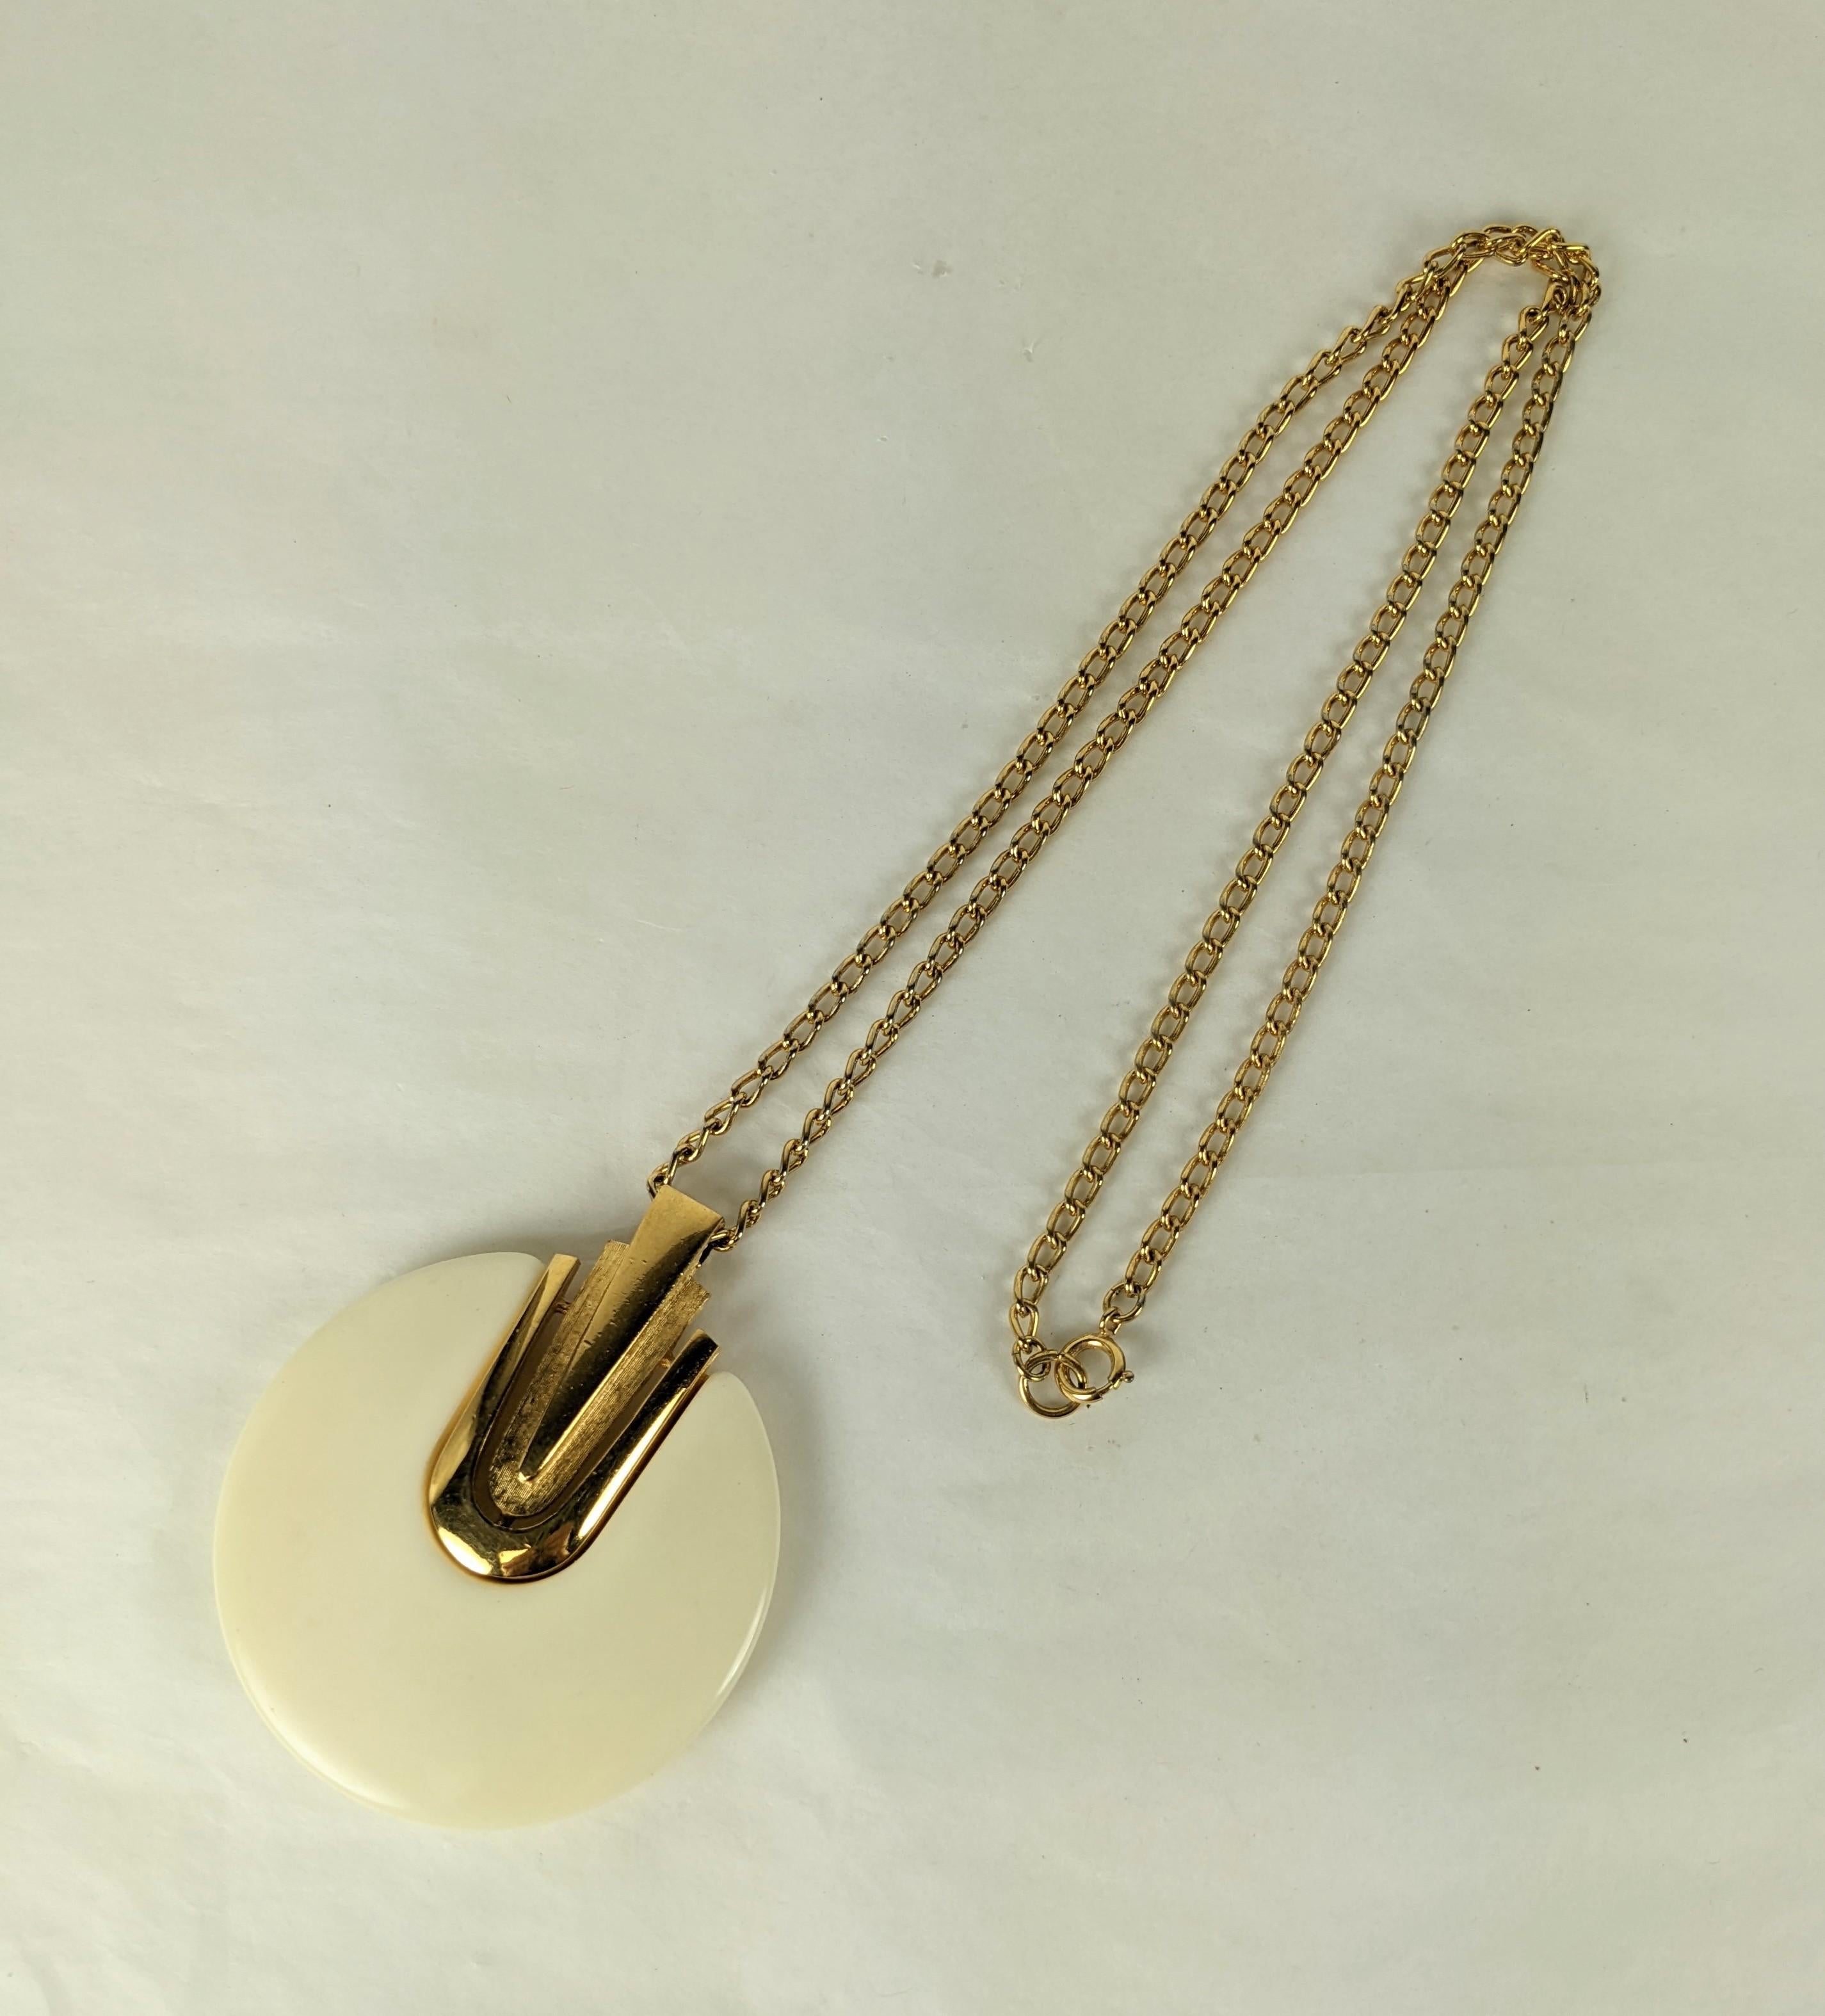 Striking Trifari Faux Ivory Pendant in the David Webb style. Signed. 1960's USA.  
3